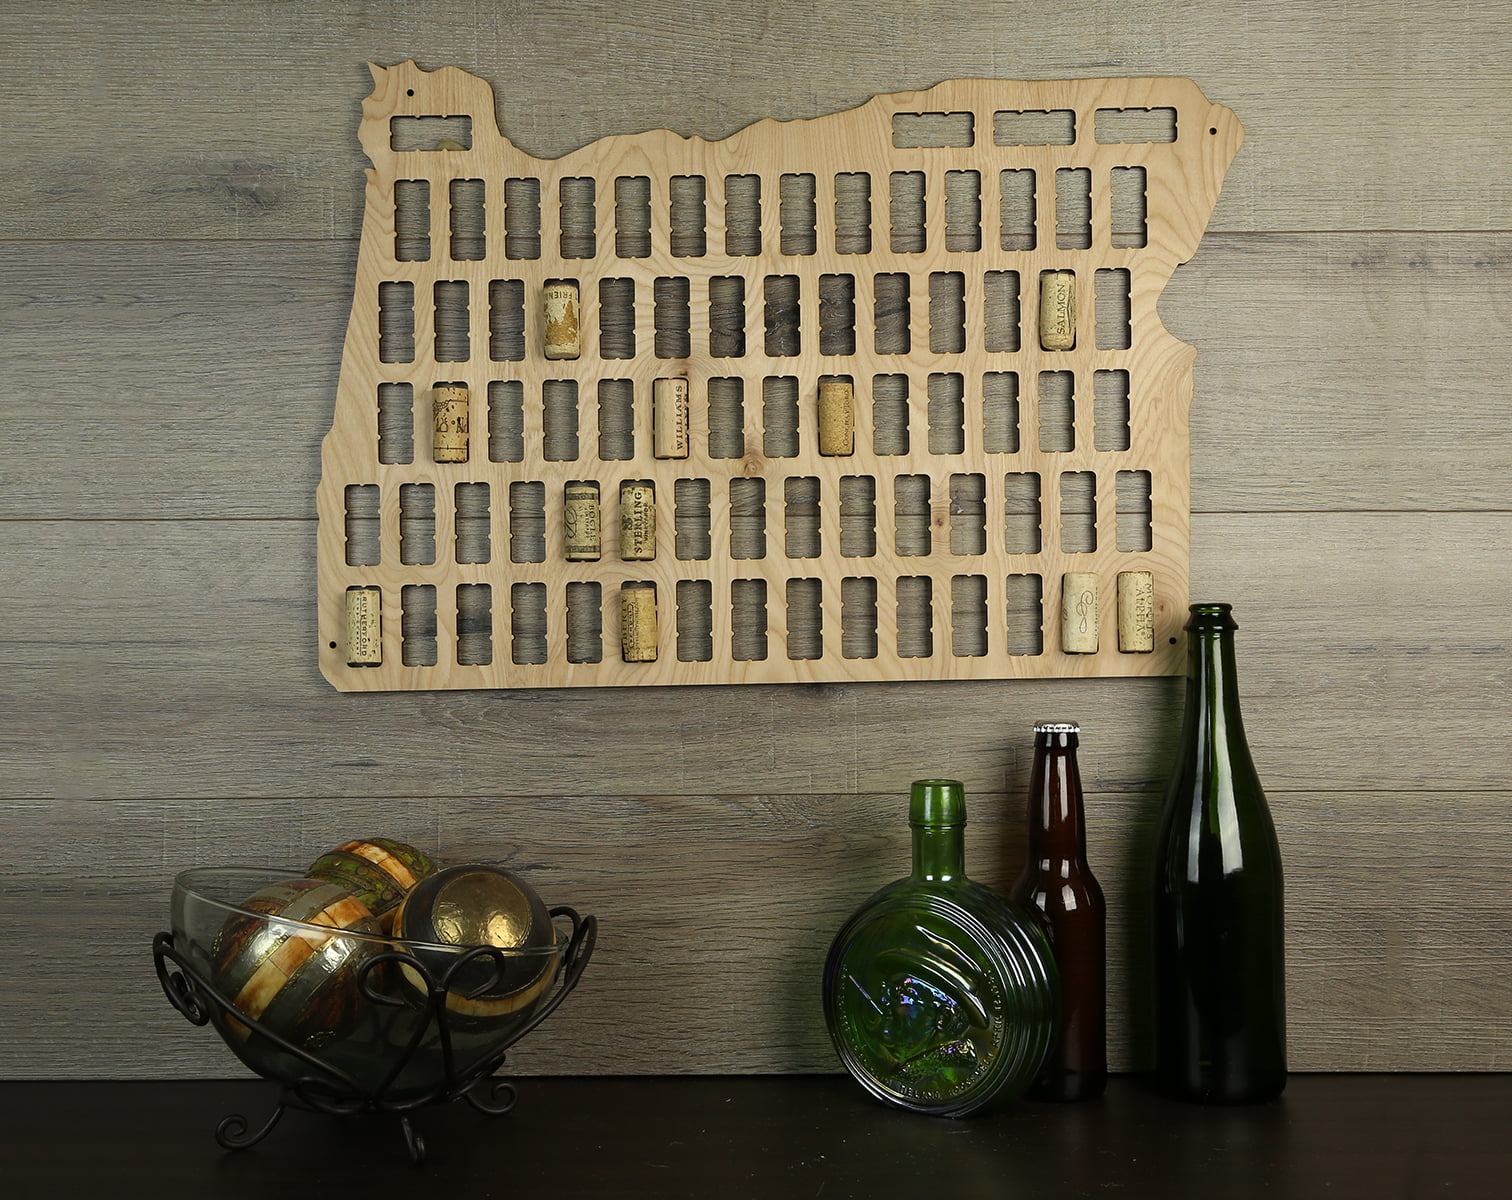 Decor Accessory or a Unique Gift for Wine Enthusiasts Bar USA Map Shaped Vino Cork Storage Holders Decorative Handmade Metal Wine Cork Holder Easy Wall Hanging and Table Display for the Home 